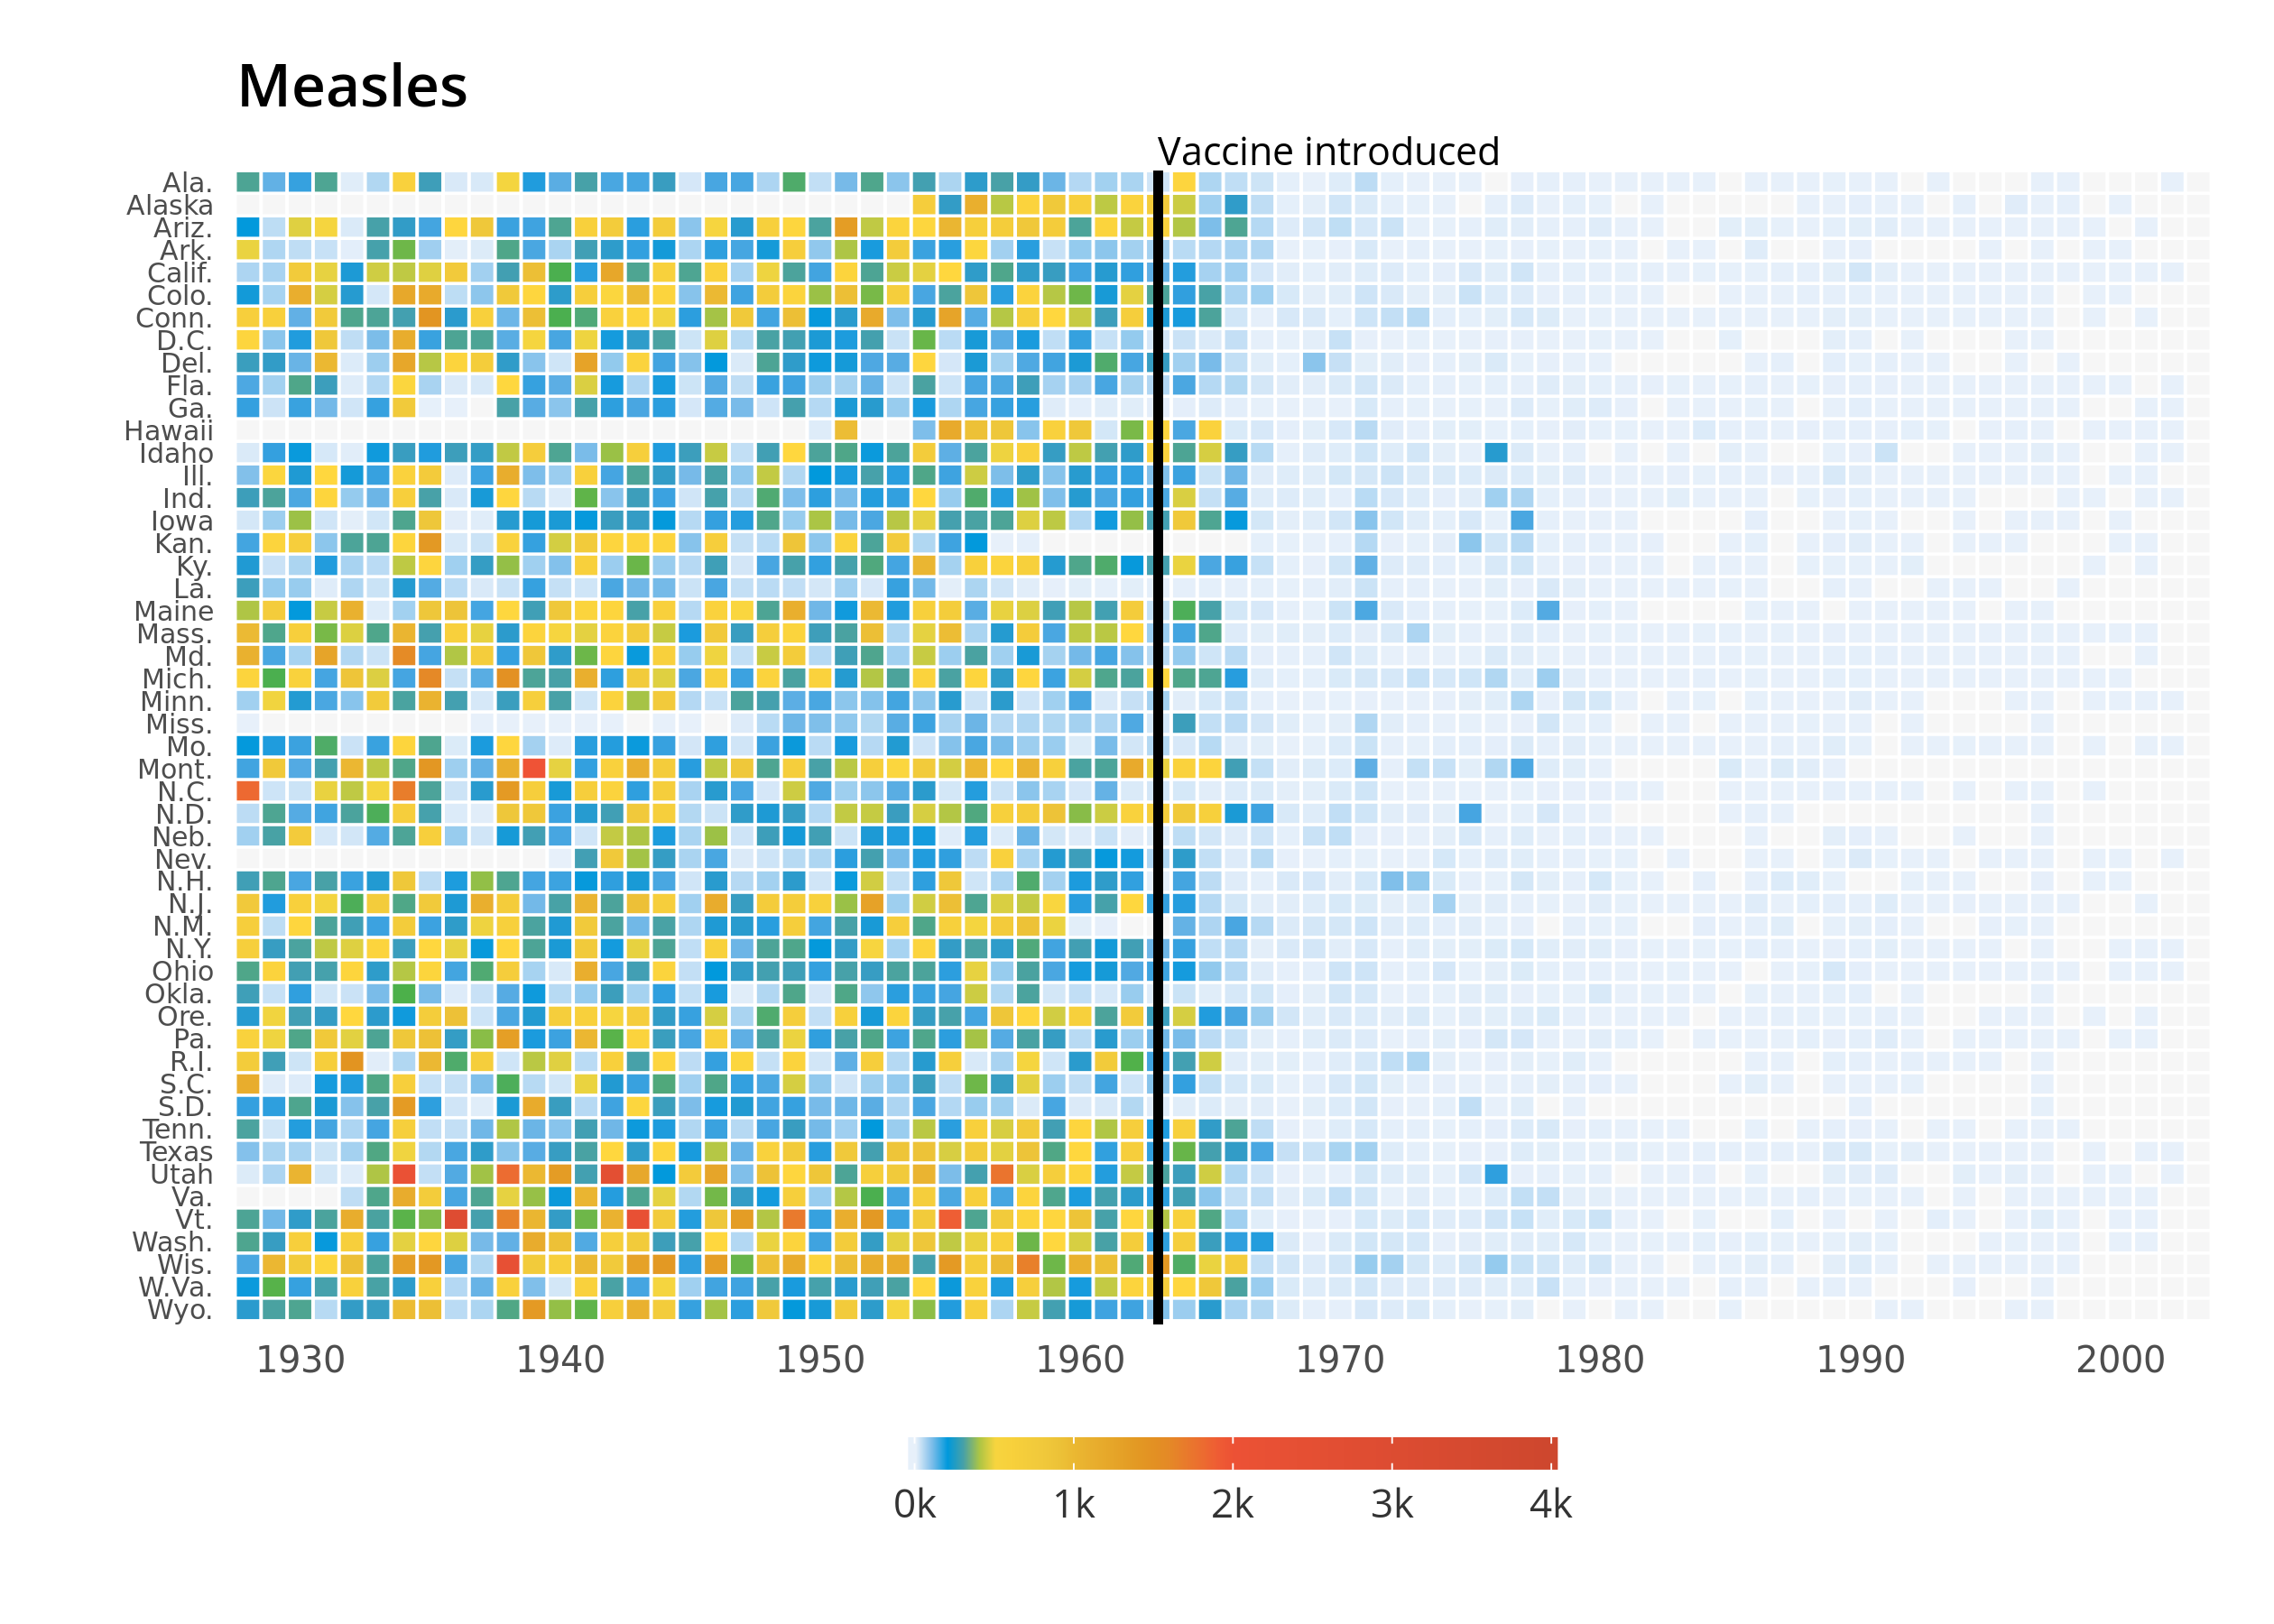 Reproduce and animate the Wall Street Journal measles vaccination incidence chart using R